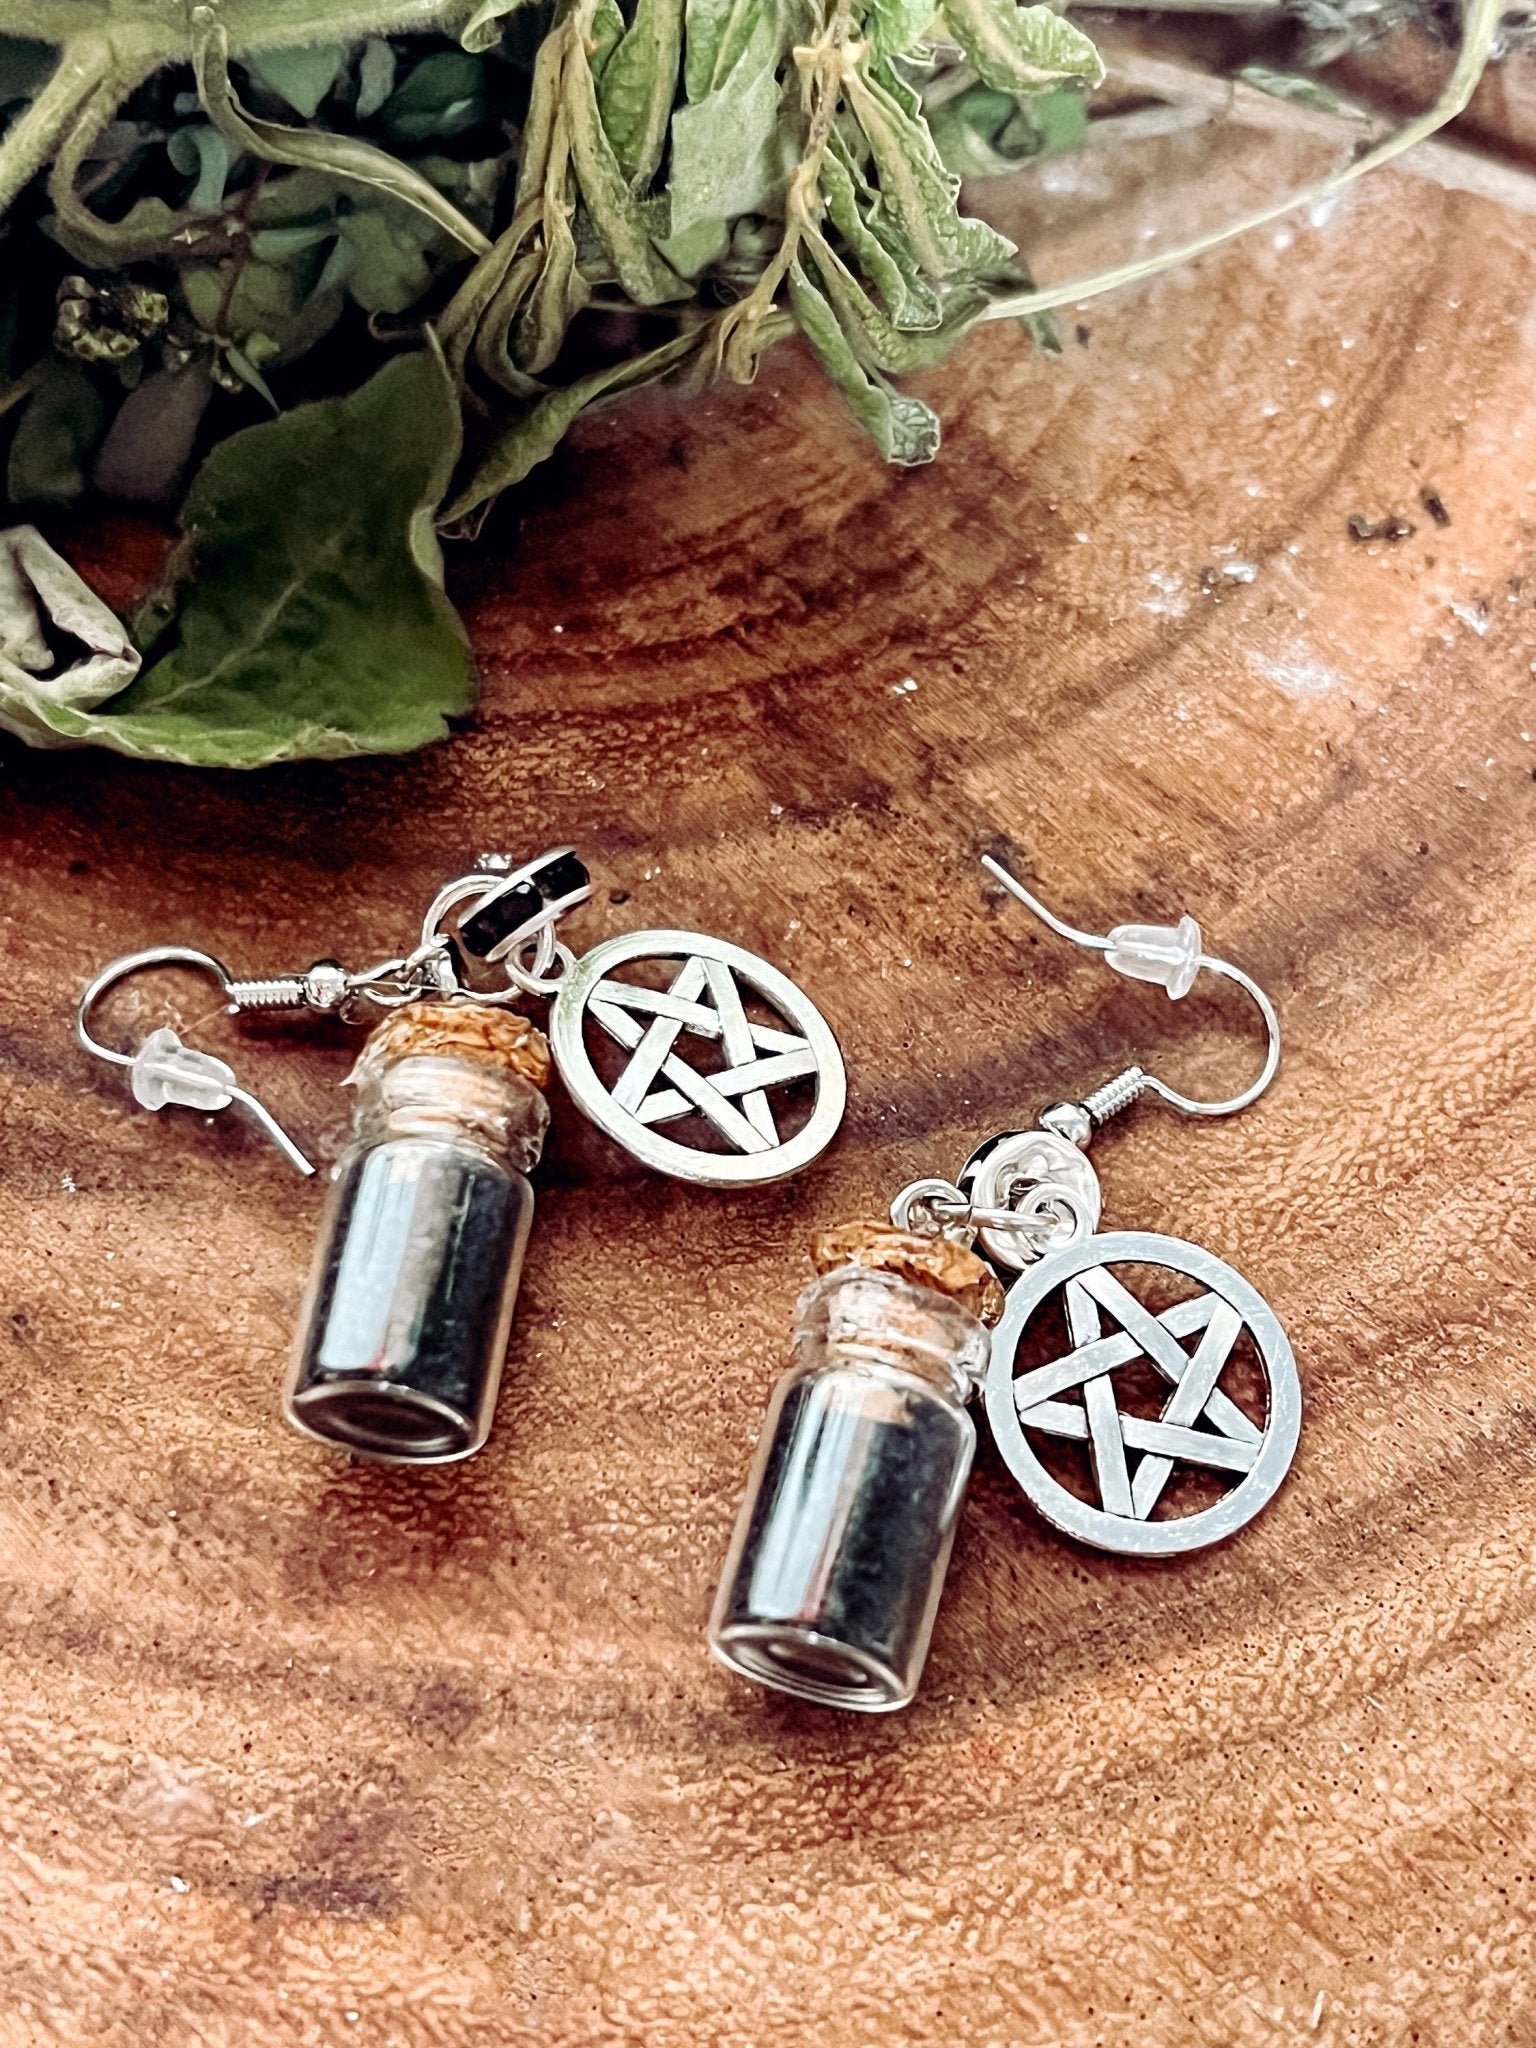 Witch Black Salt Jar Spell Protection Earrings - Black Obsidian Crystal Chip Wicca Witch Jewelry Hoodoo - MysticBluuMoonTarot